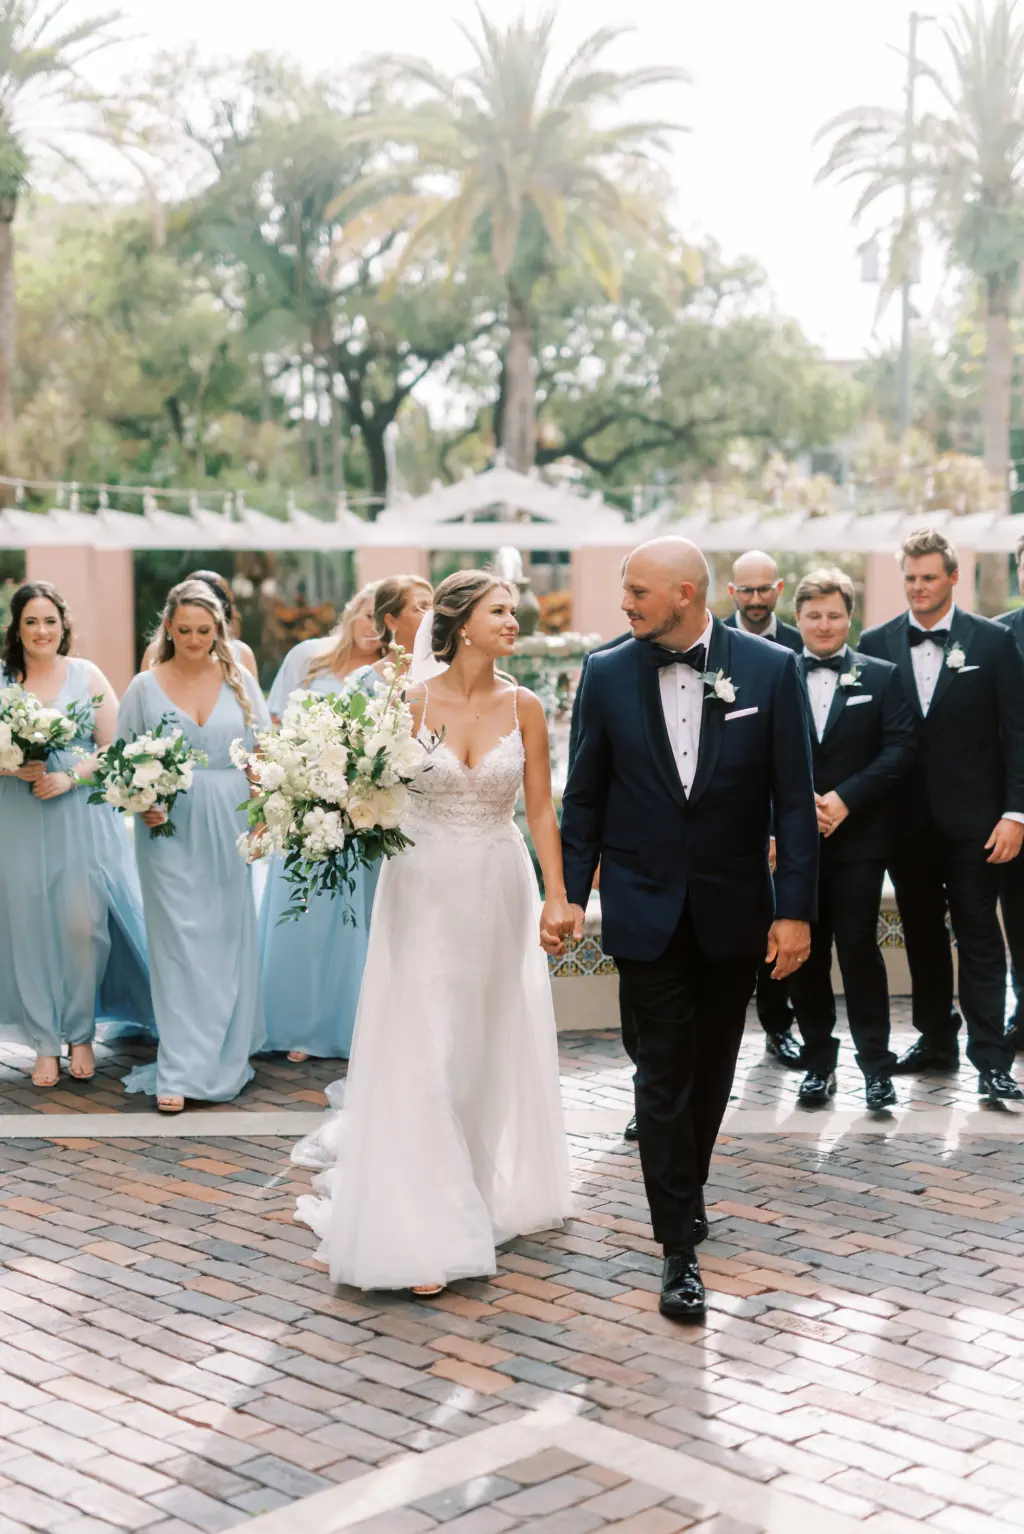 Bride and Groom Just Married with Wedding Party | Downtown St Pete Venue The Vinoy